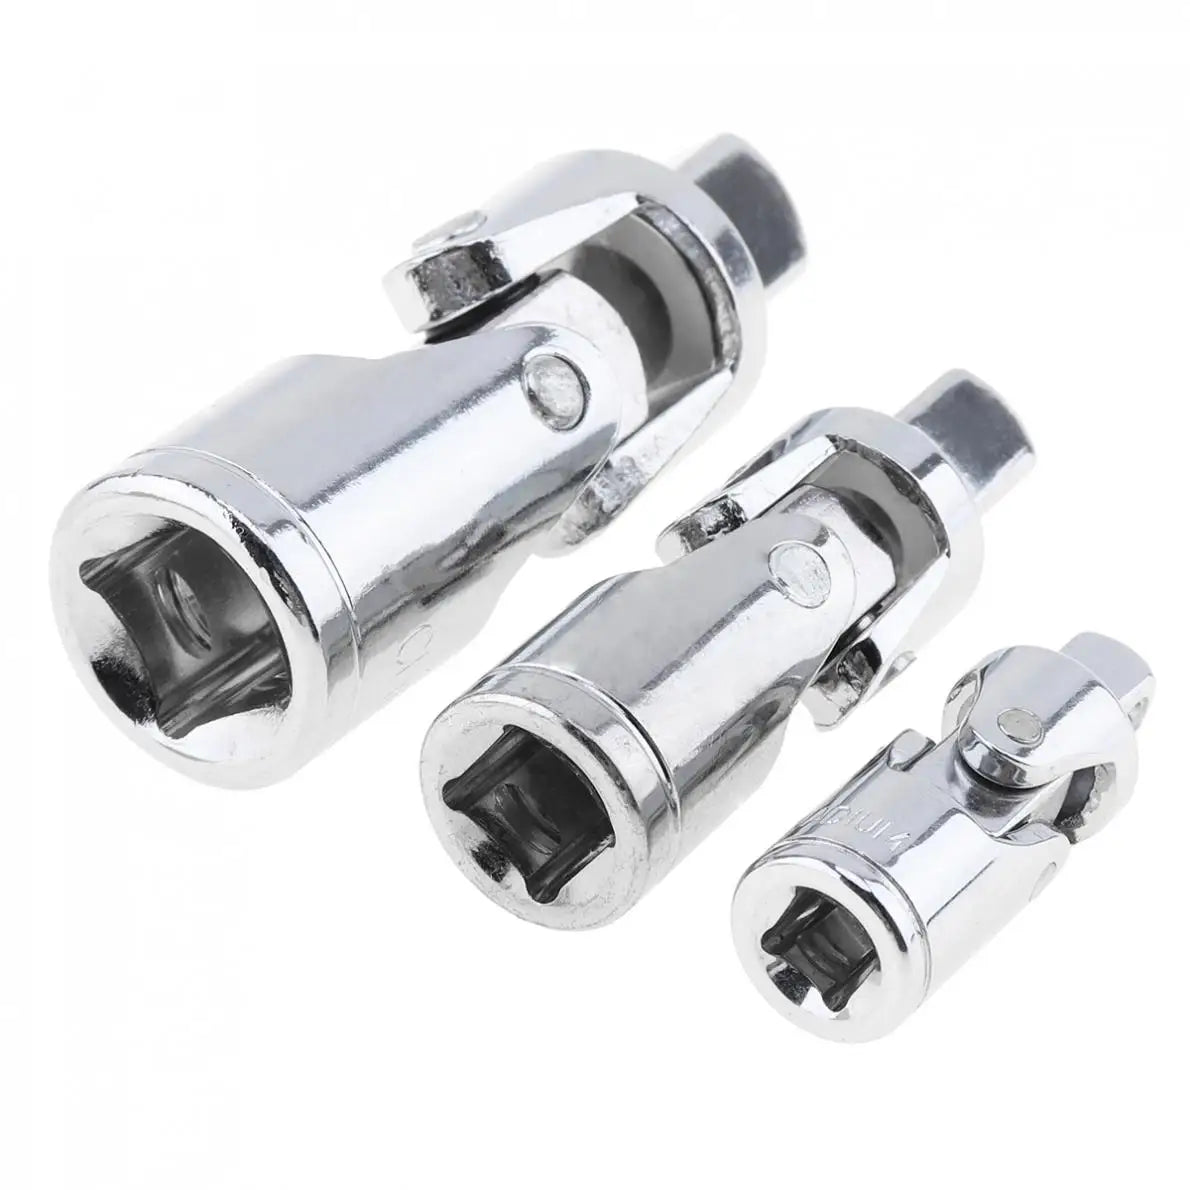 3pcs Impact Universal Joint Socket Wrench Set 1/4-Inch 3/8-Inch 1/2-Inch